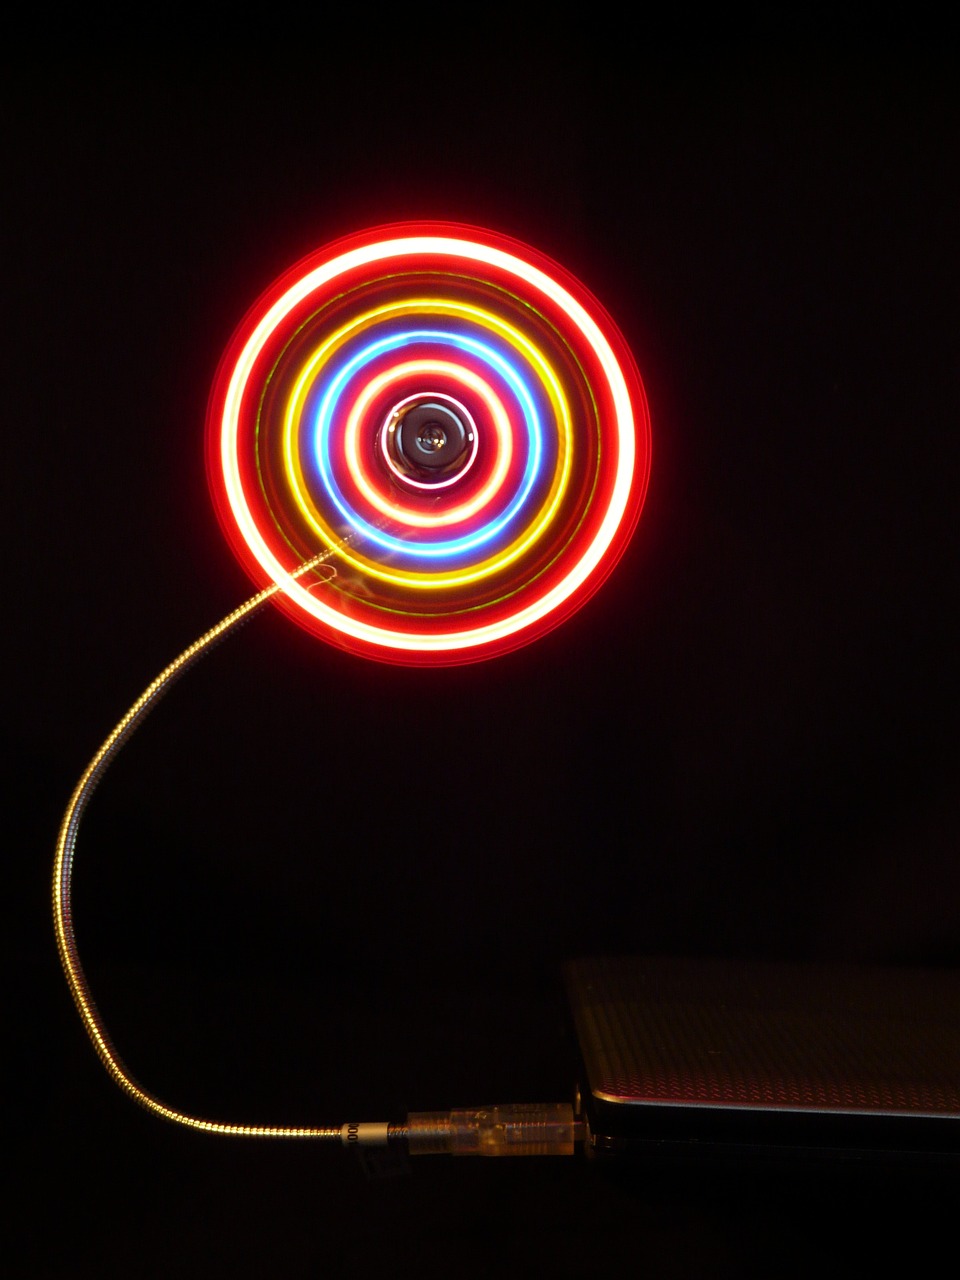 the red, yellow and blue ring has its light on